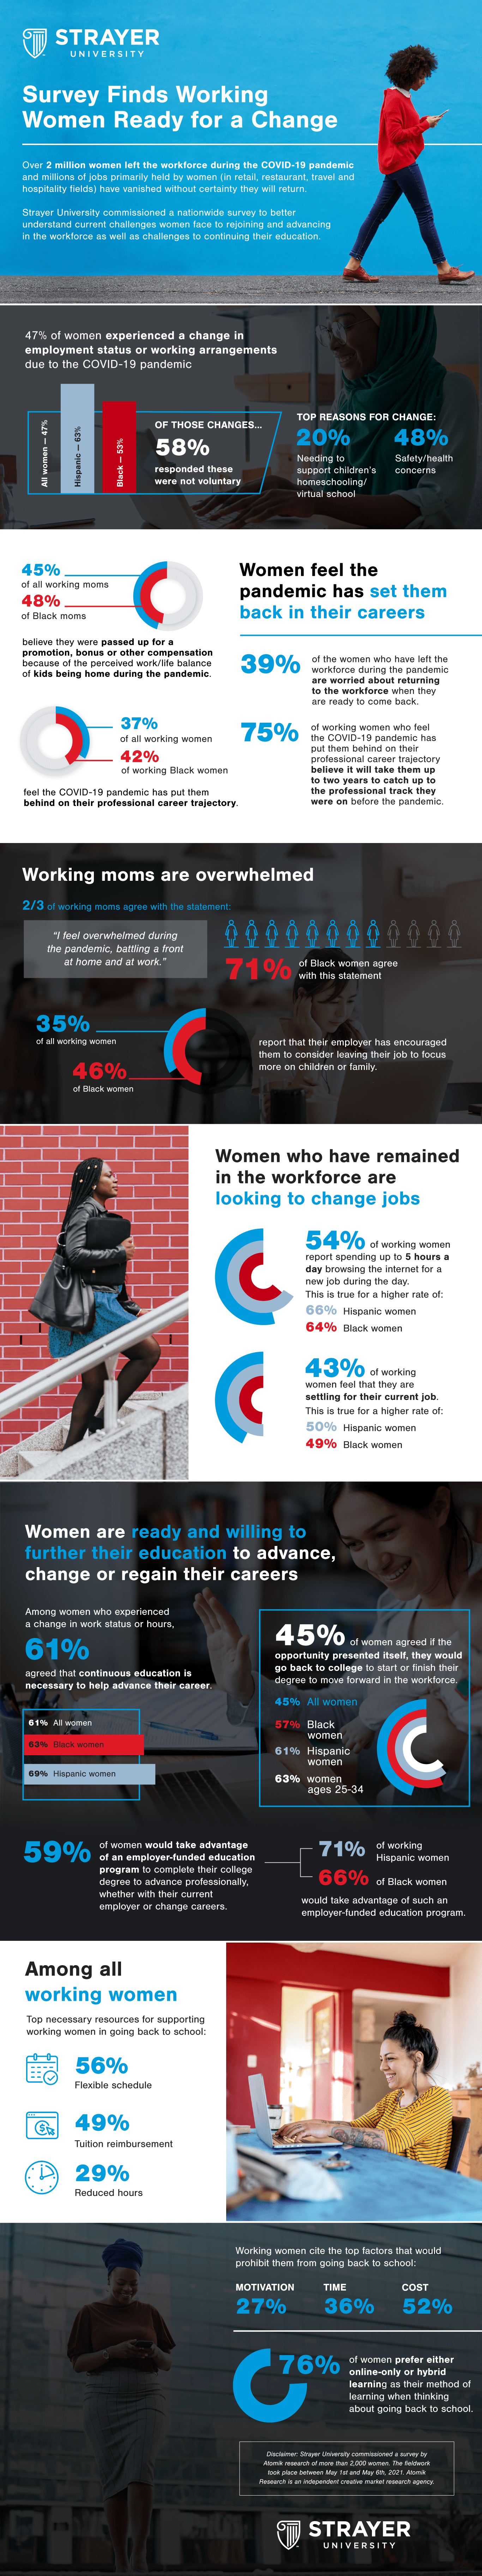 Women in the Workplace infographic